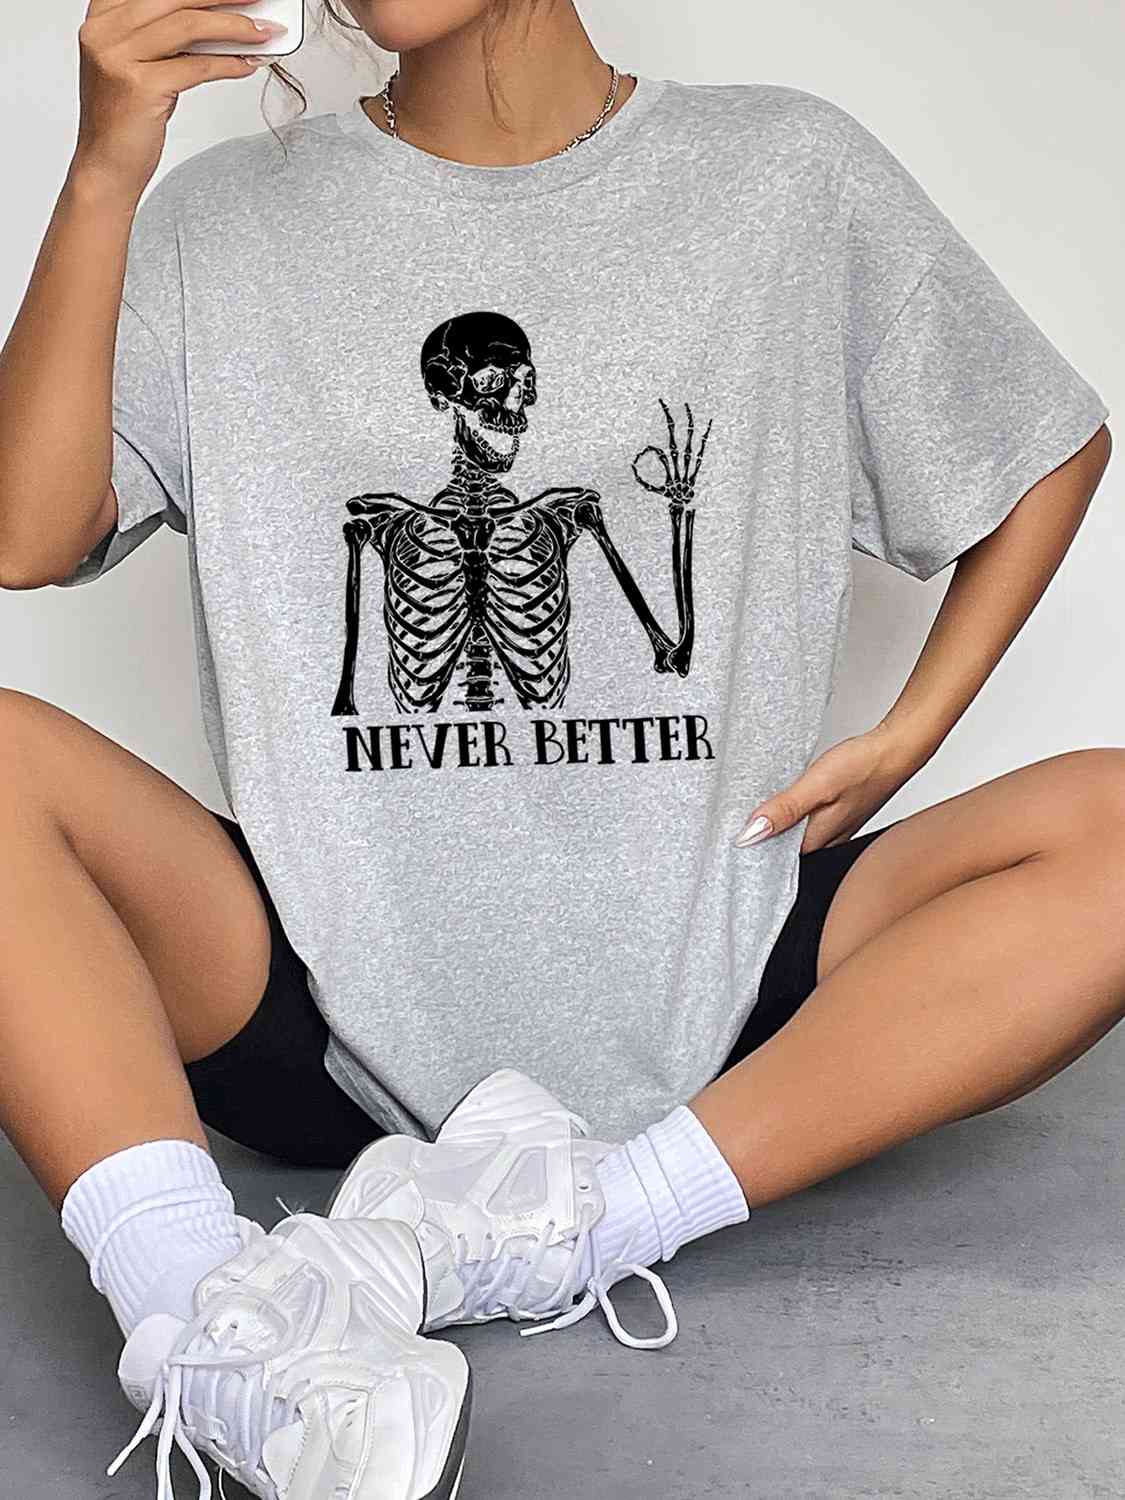 Eat Your Heart Out Tee